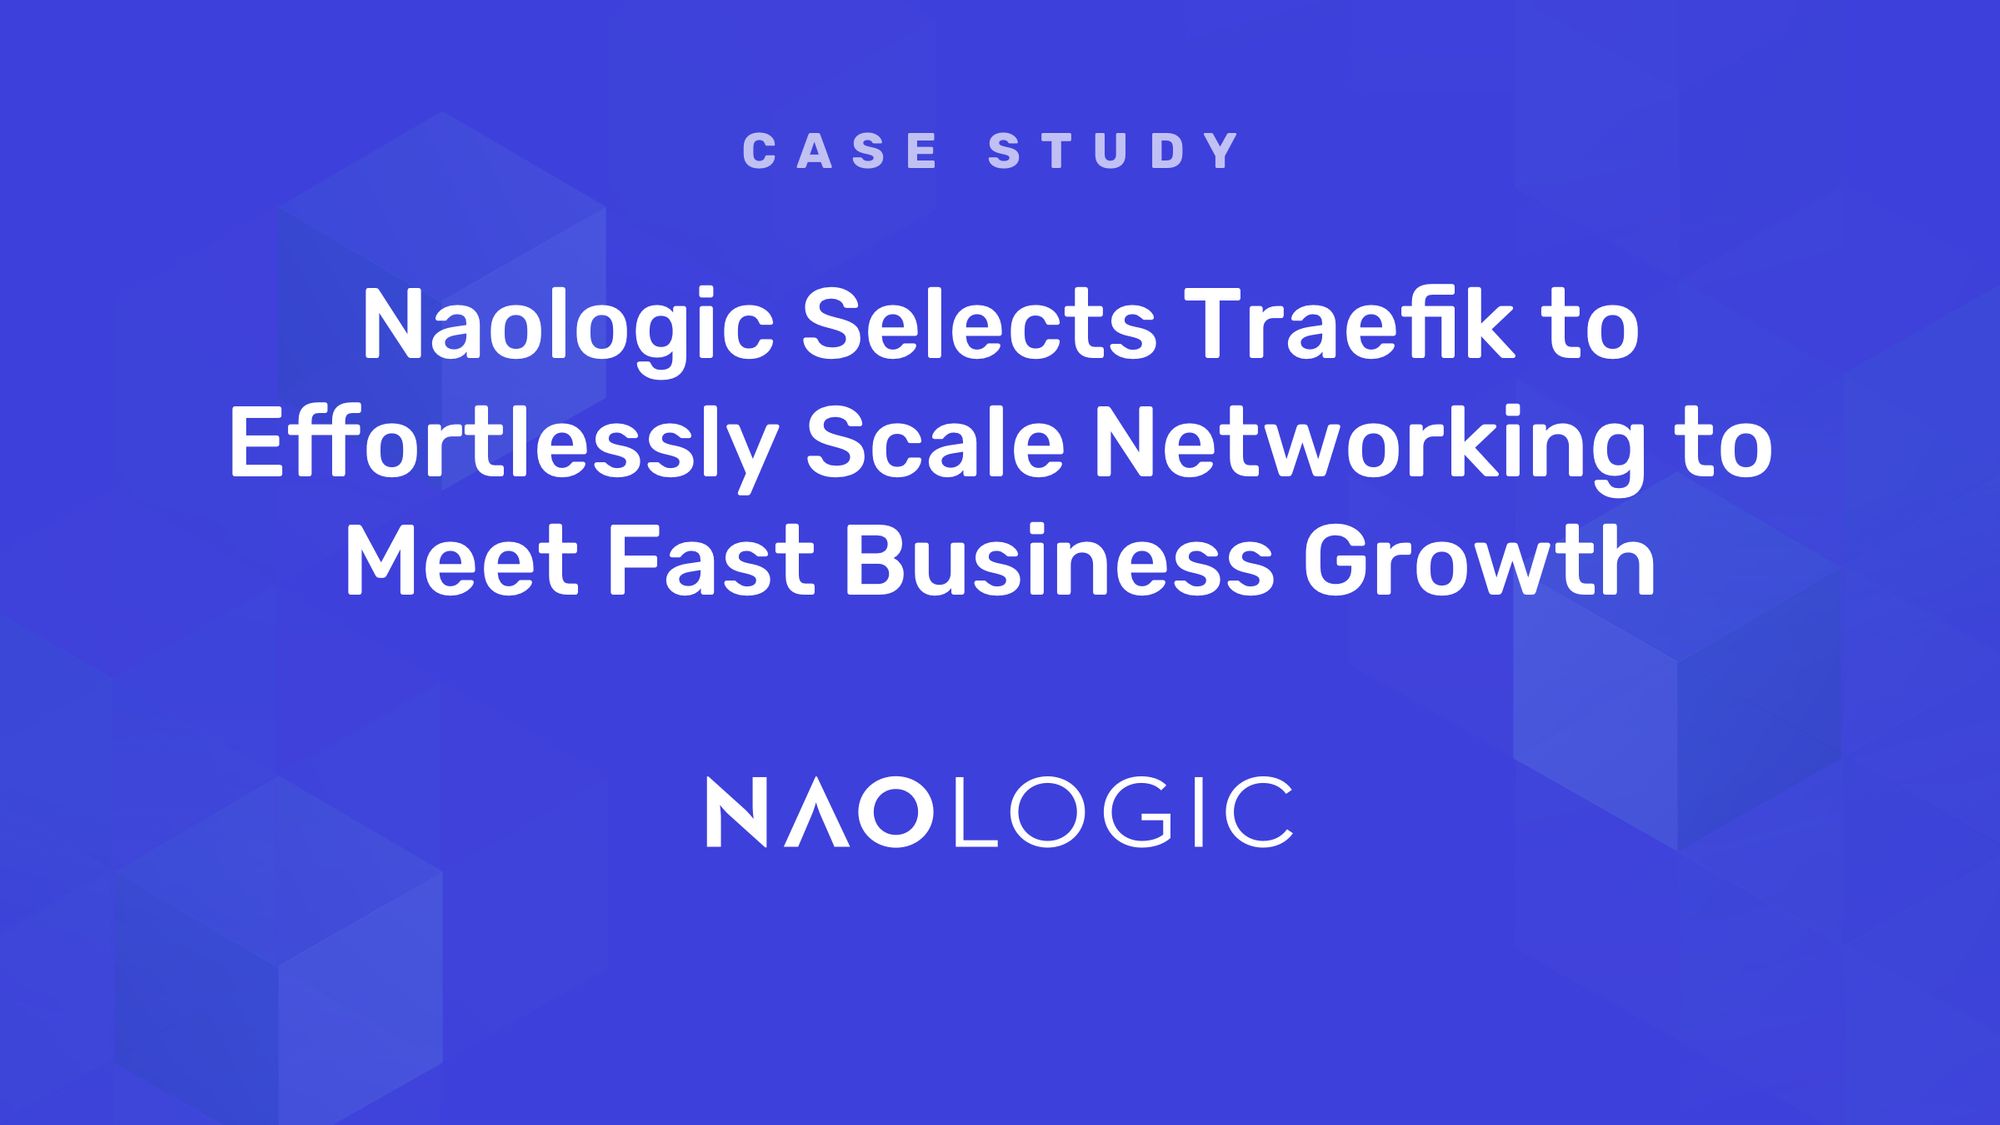 Naologic Selects Traefik to Effortlessly Scale Networking to Meet Fast Business Growth